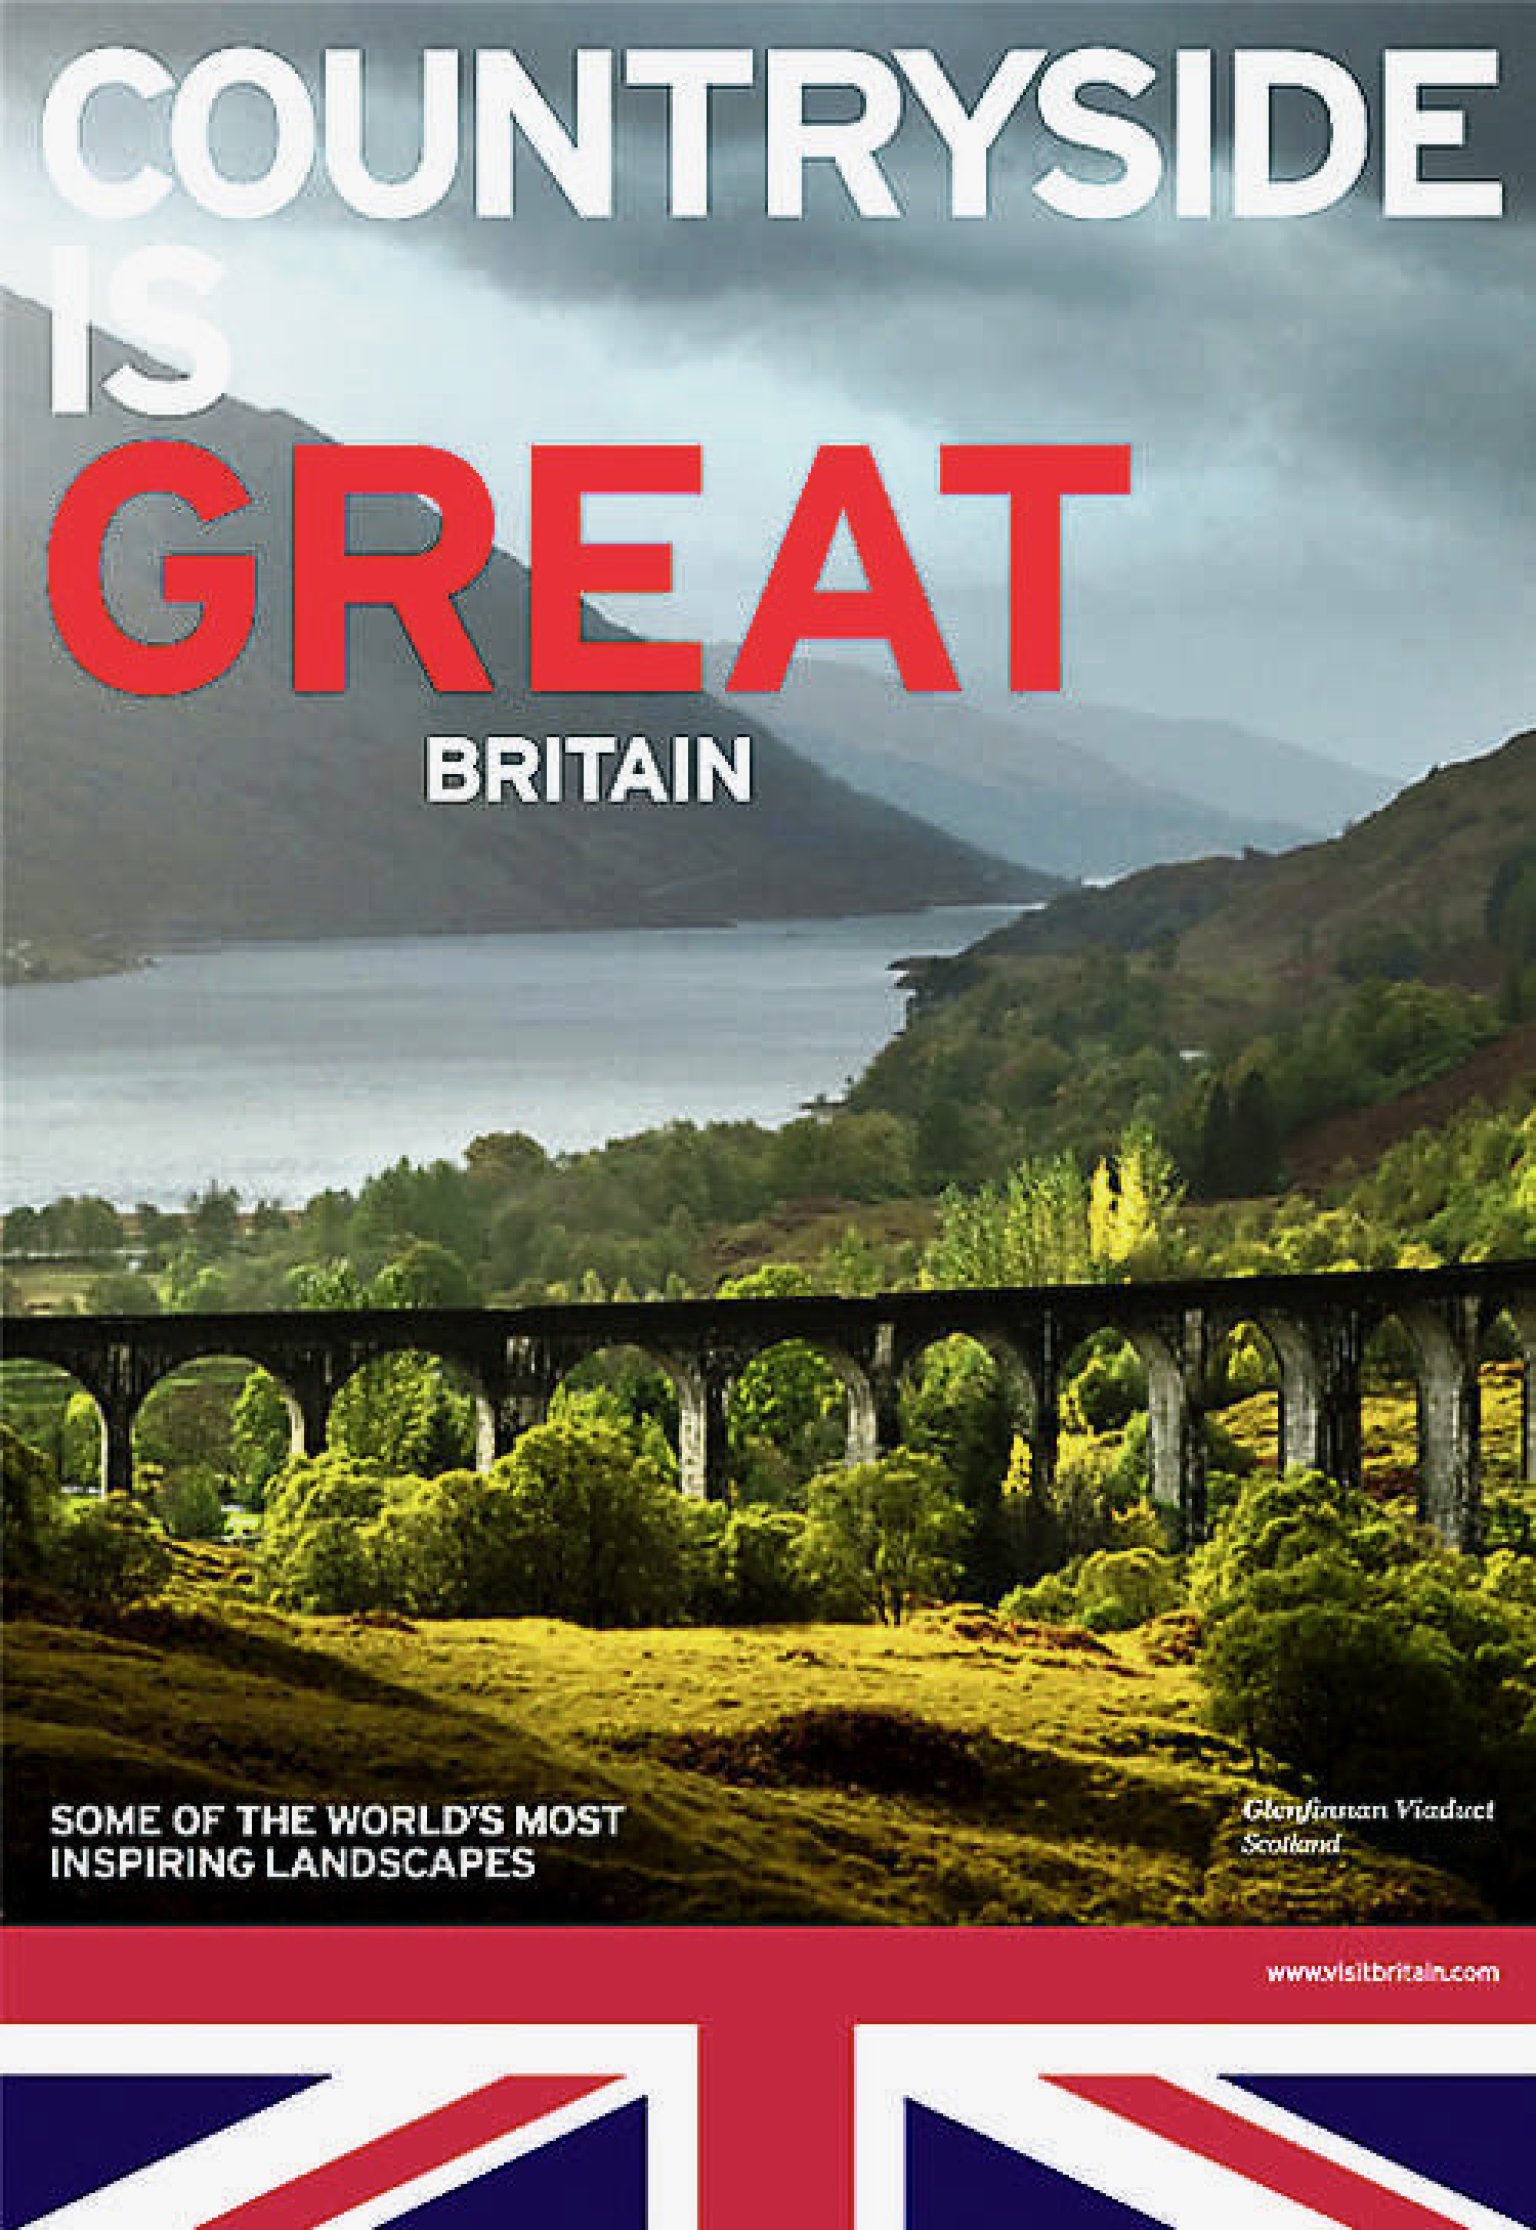 New great campaign. Music is great кампания Великобритании. Poster for great Britain. The Tourist poster English.